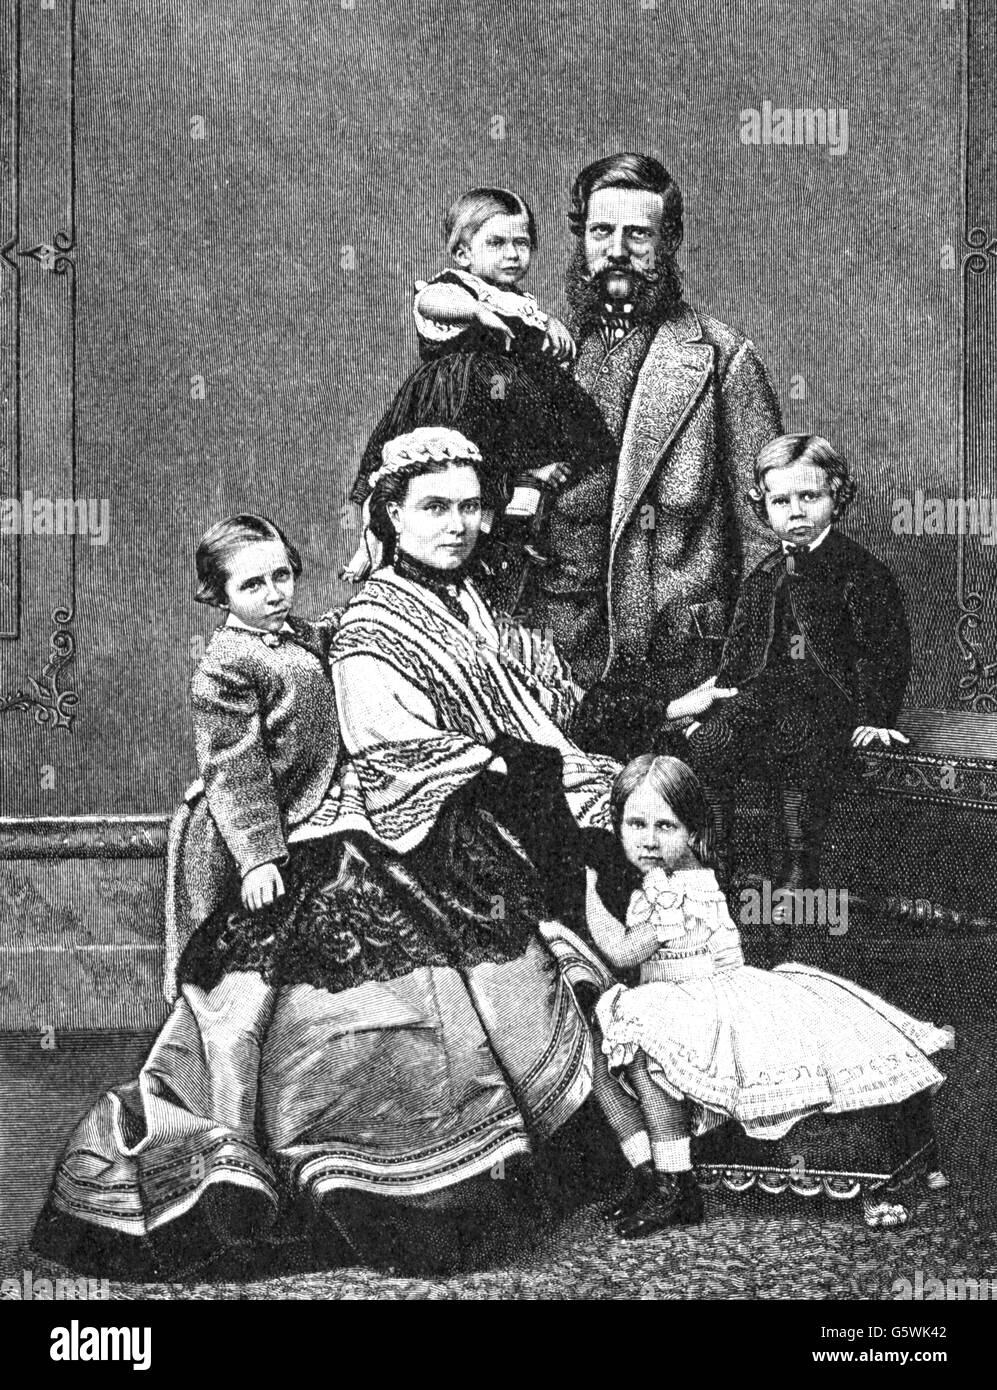 Frederick III, 18.10.1831 - 15.6.1888, German Emperor 9.3. - 15.6.1888, with wife Victoria Adelaide, children Prince William, prince Henry, Princess Charlotte and Princess Viktoria, wood engraving after photograph, 1867, Stock Photo